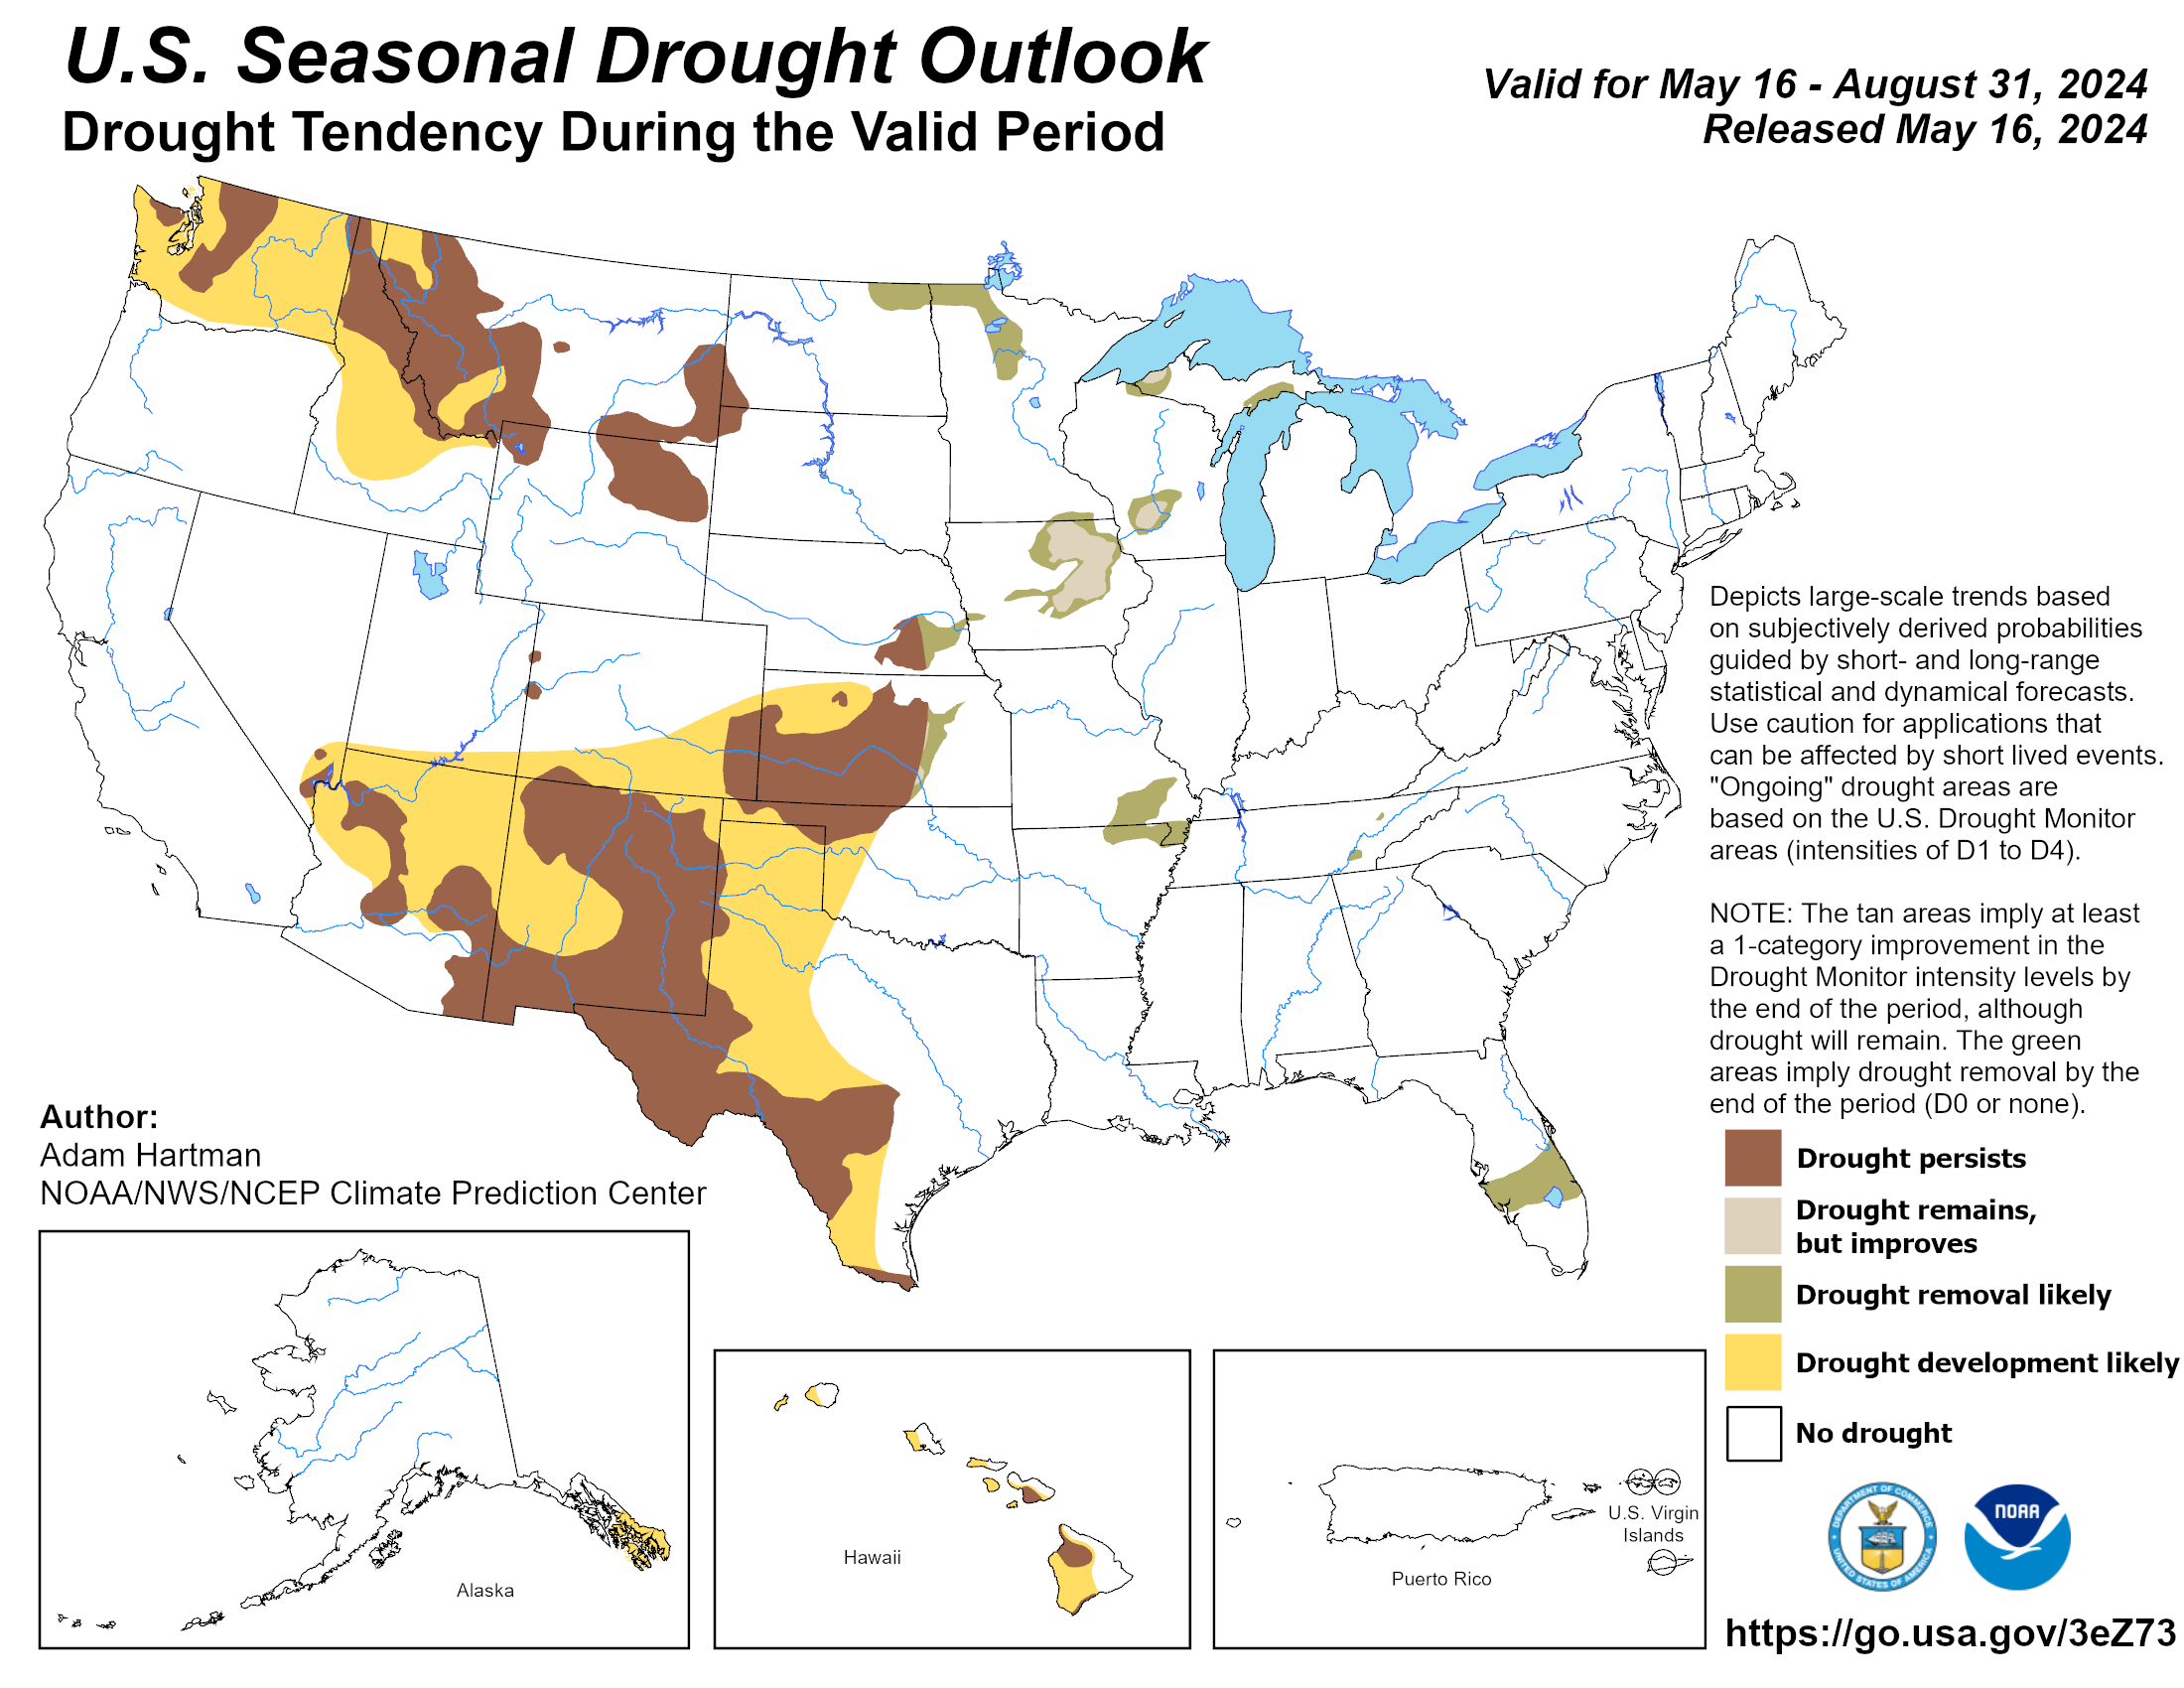 Drought Outlook Map of the United States